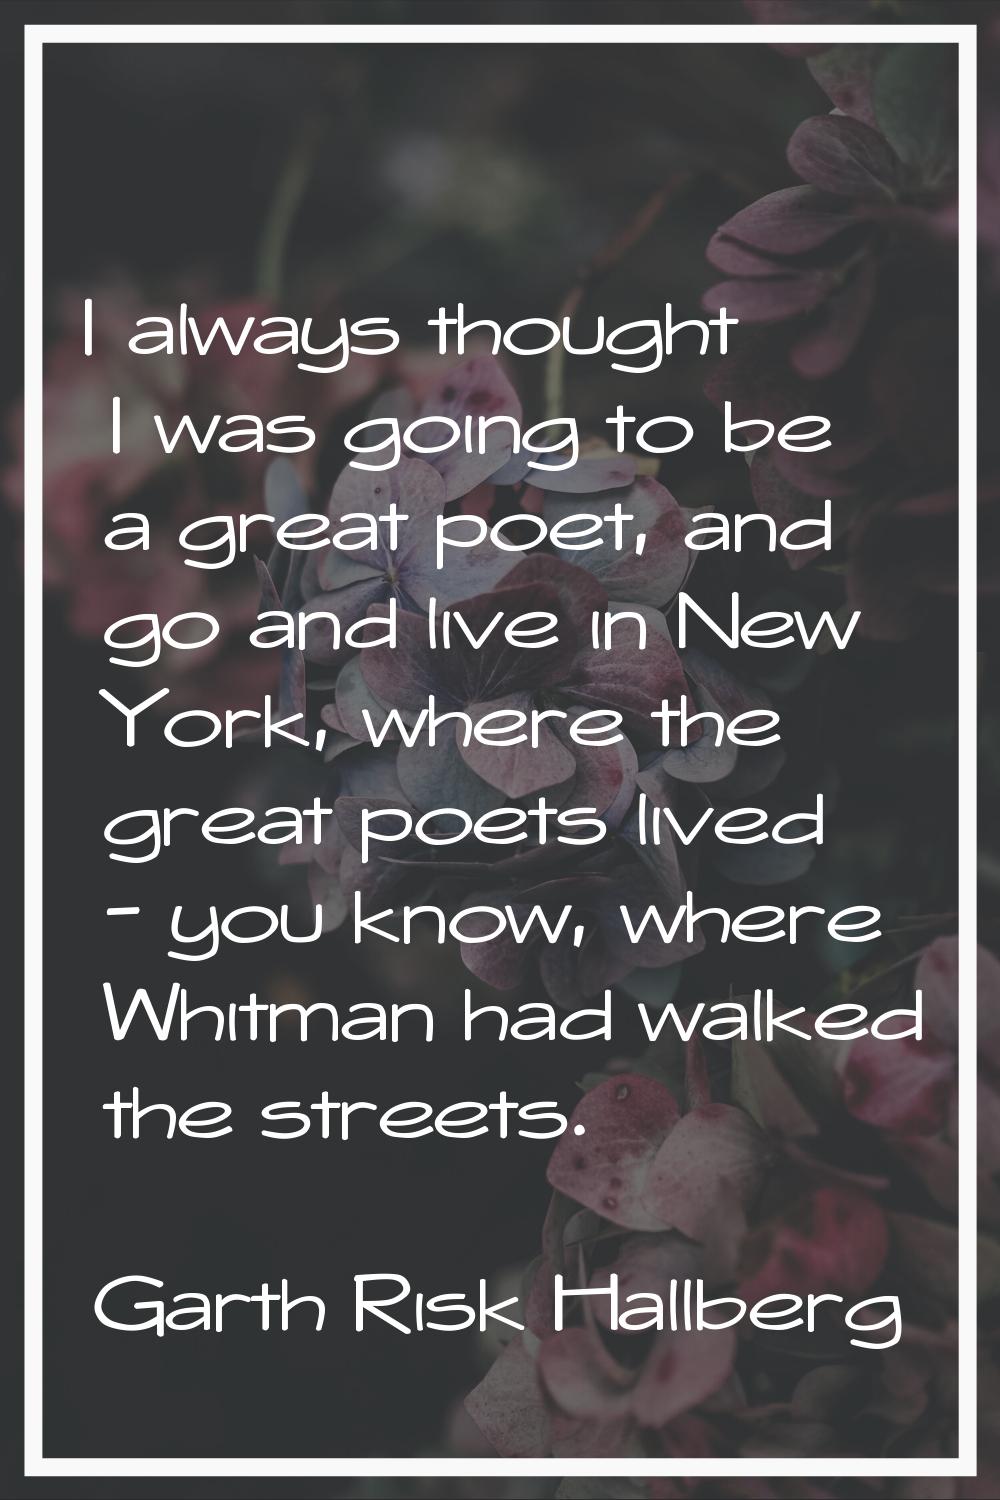 I always thought I was going to be a great poet, and go and live in New York, where the great poets